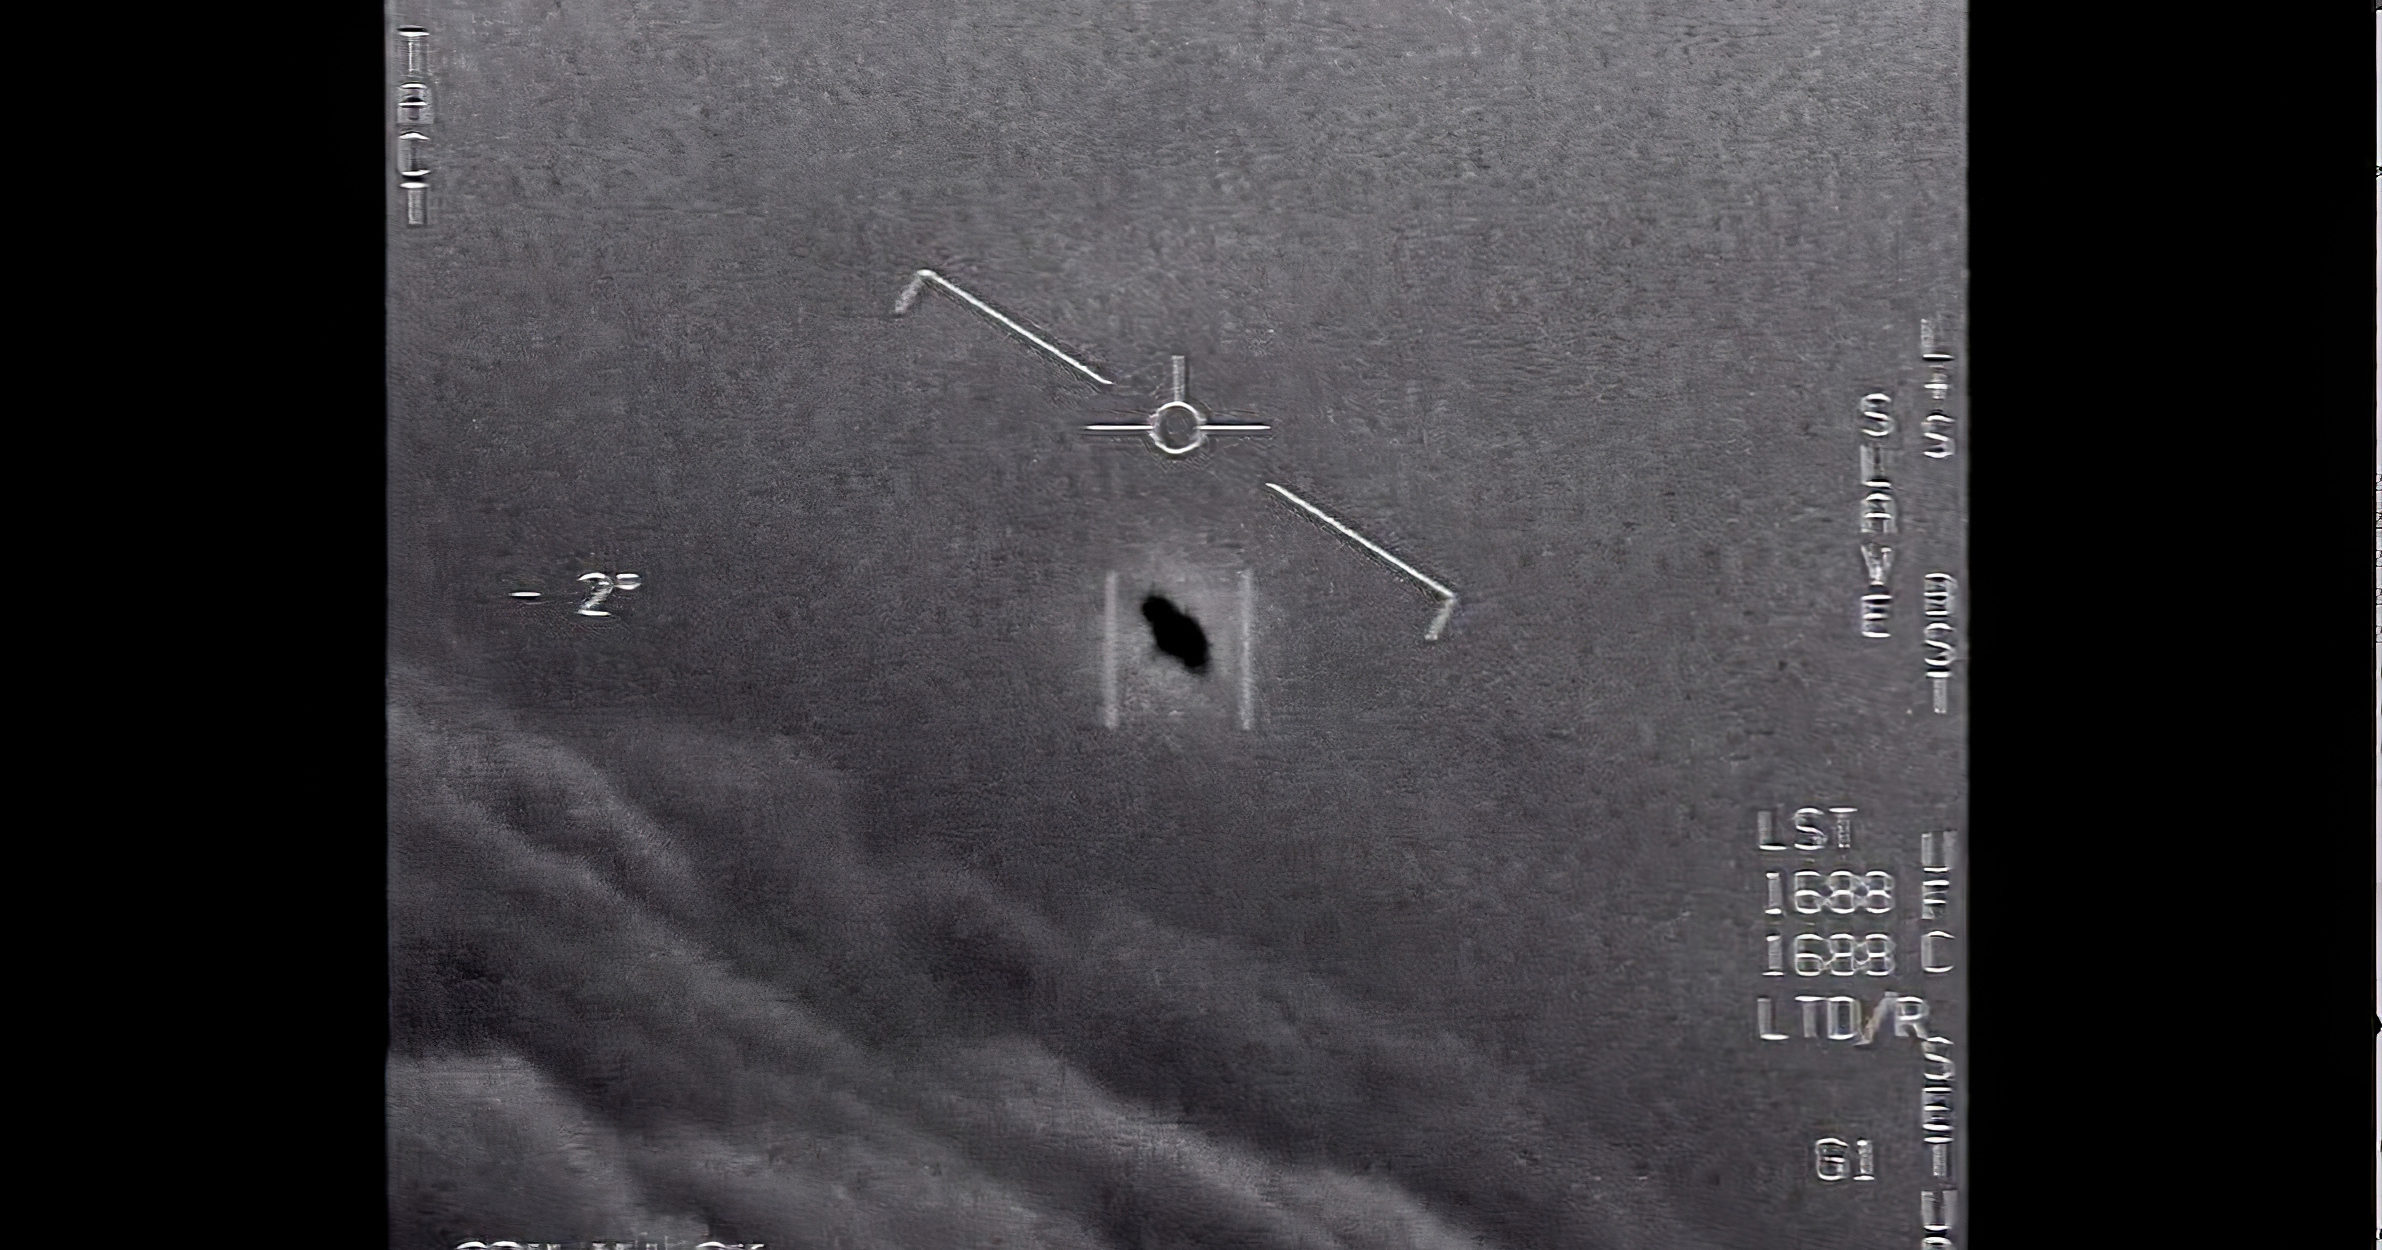 This image from 2015 shows an unidentified flying object as it is tracked.